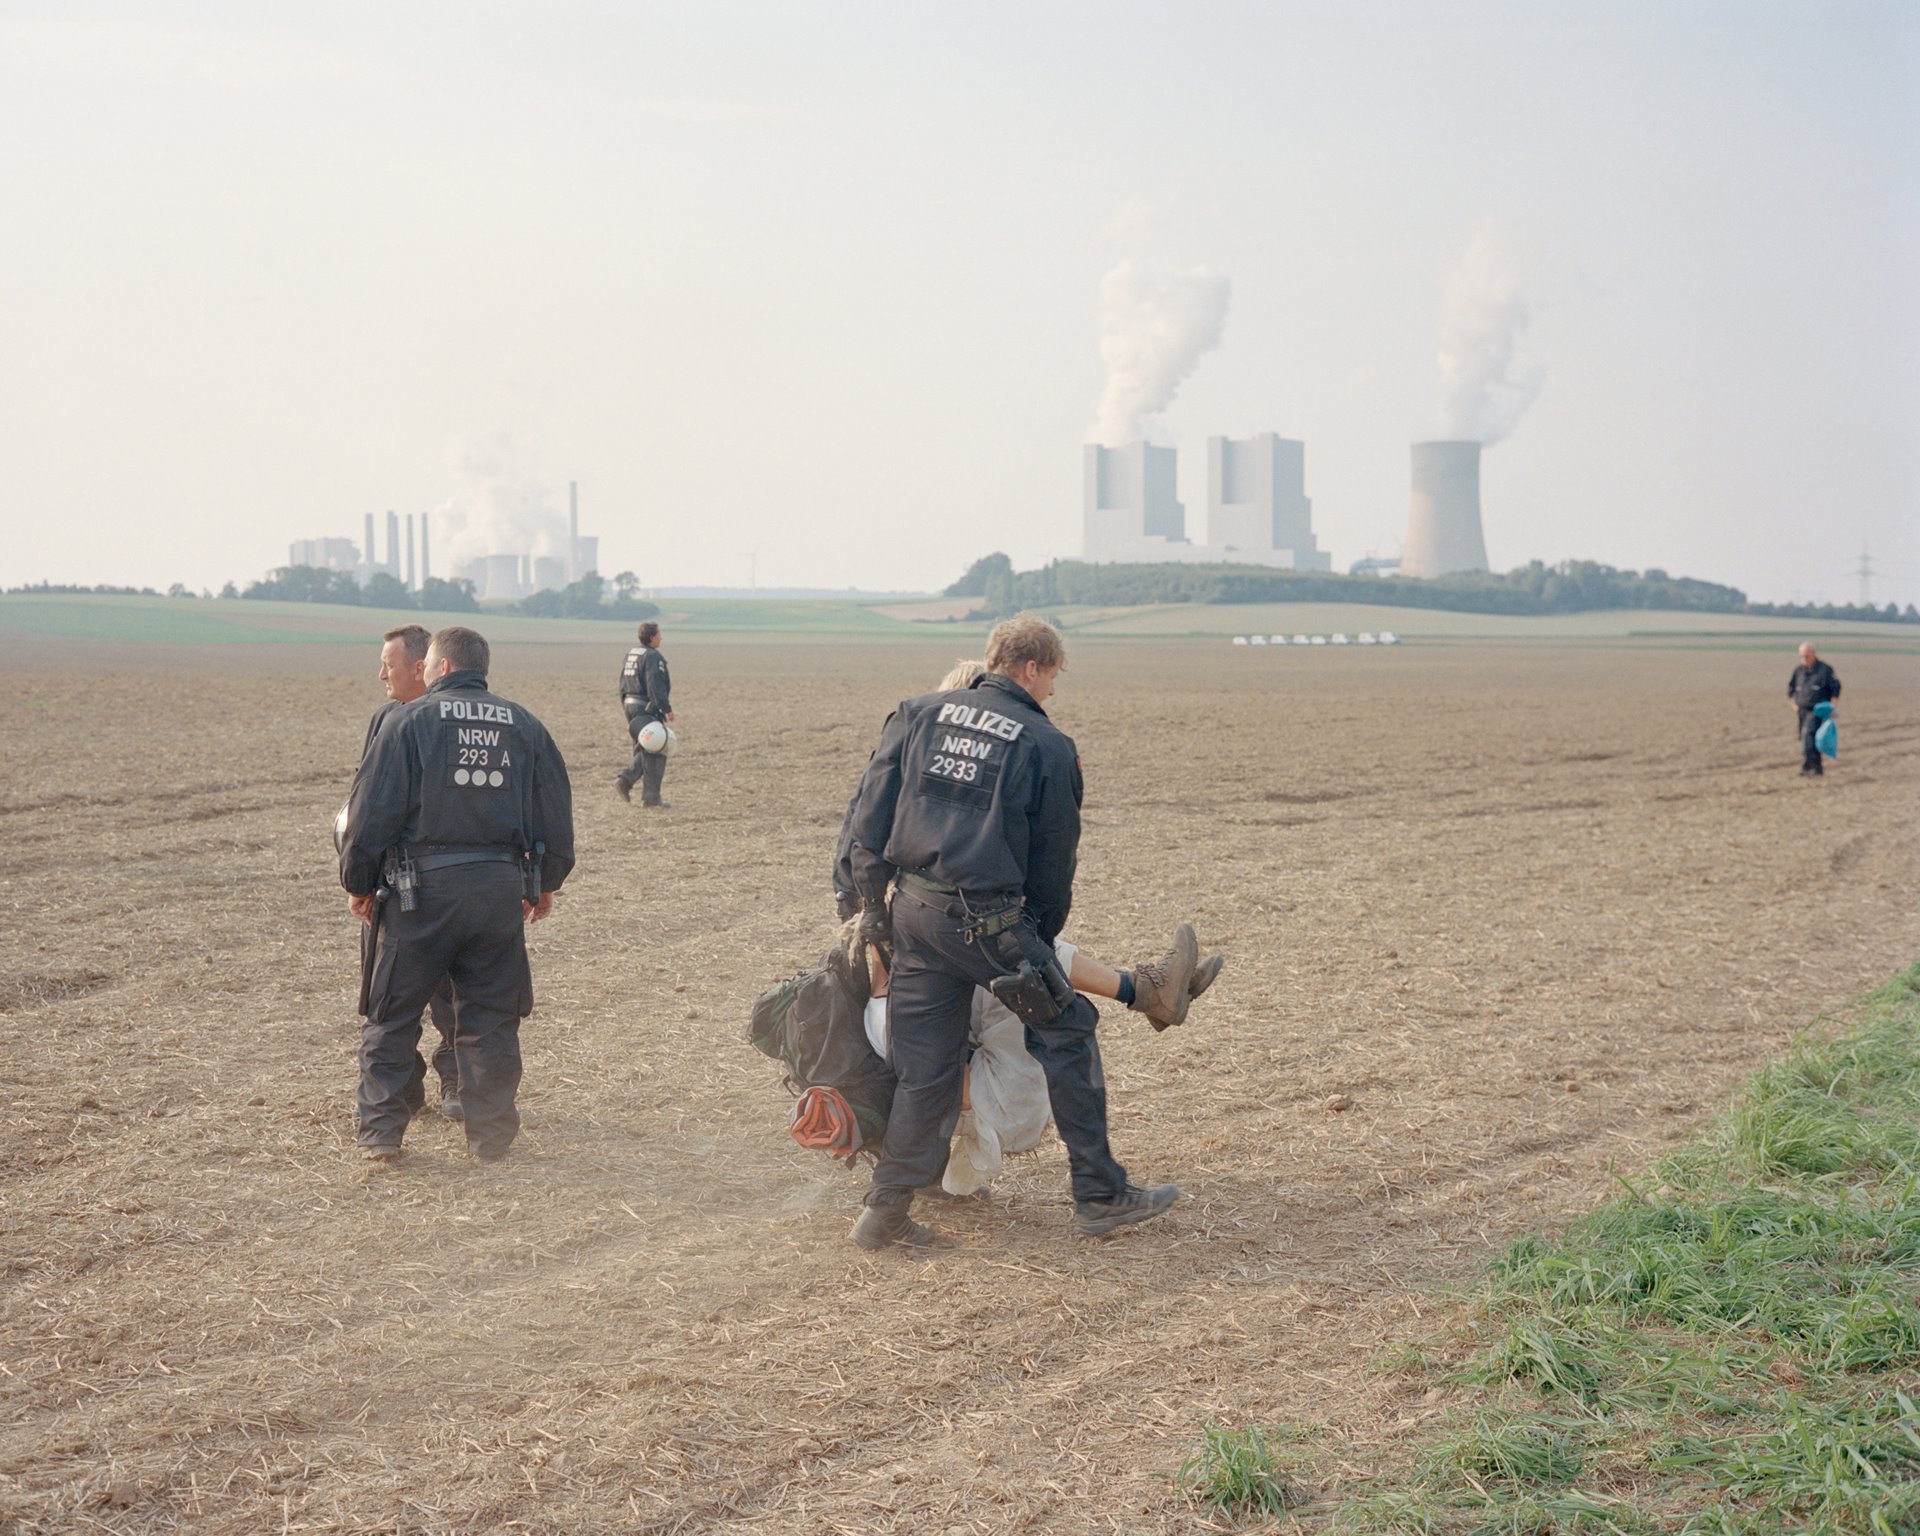 Police officers in Bedburg, Germany, carry away a demonstrator after surrounding hundreds of activists in a field beside railroad tracks leading to the Neurath coal-fired power plant.